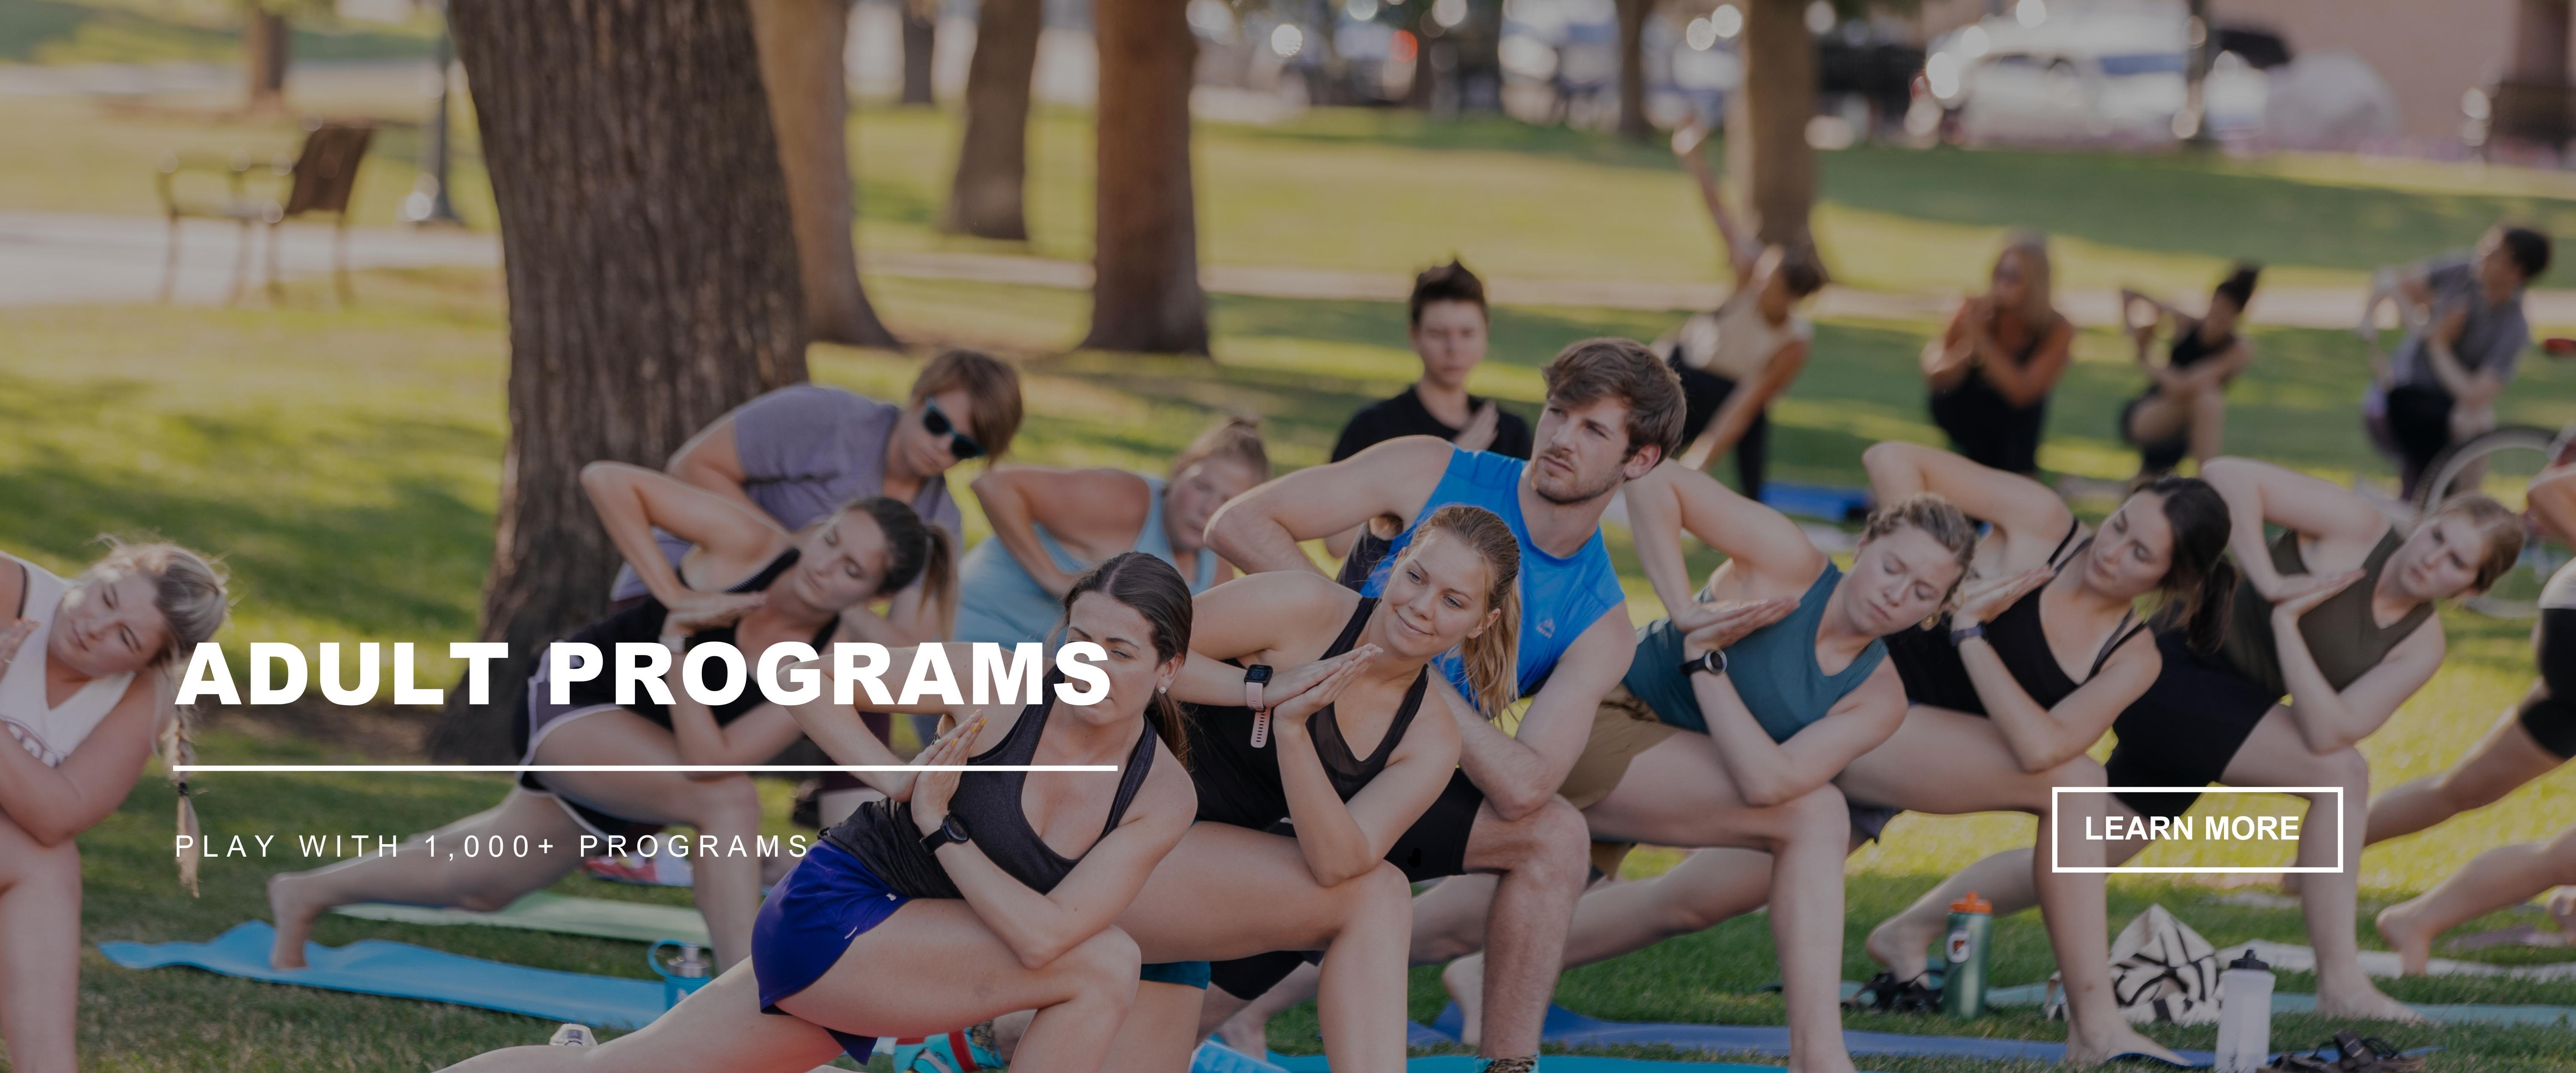 ADULT PROGRAMS - Play with 1,000+ Programs - 10+ adults doing outdoor yoga in a park